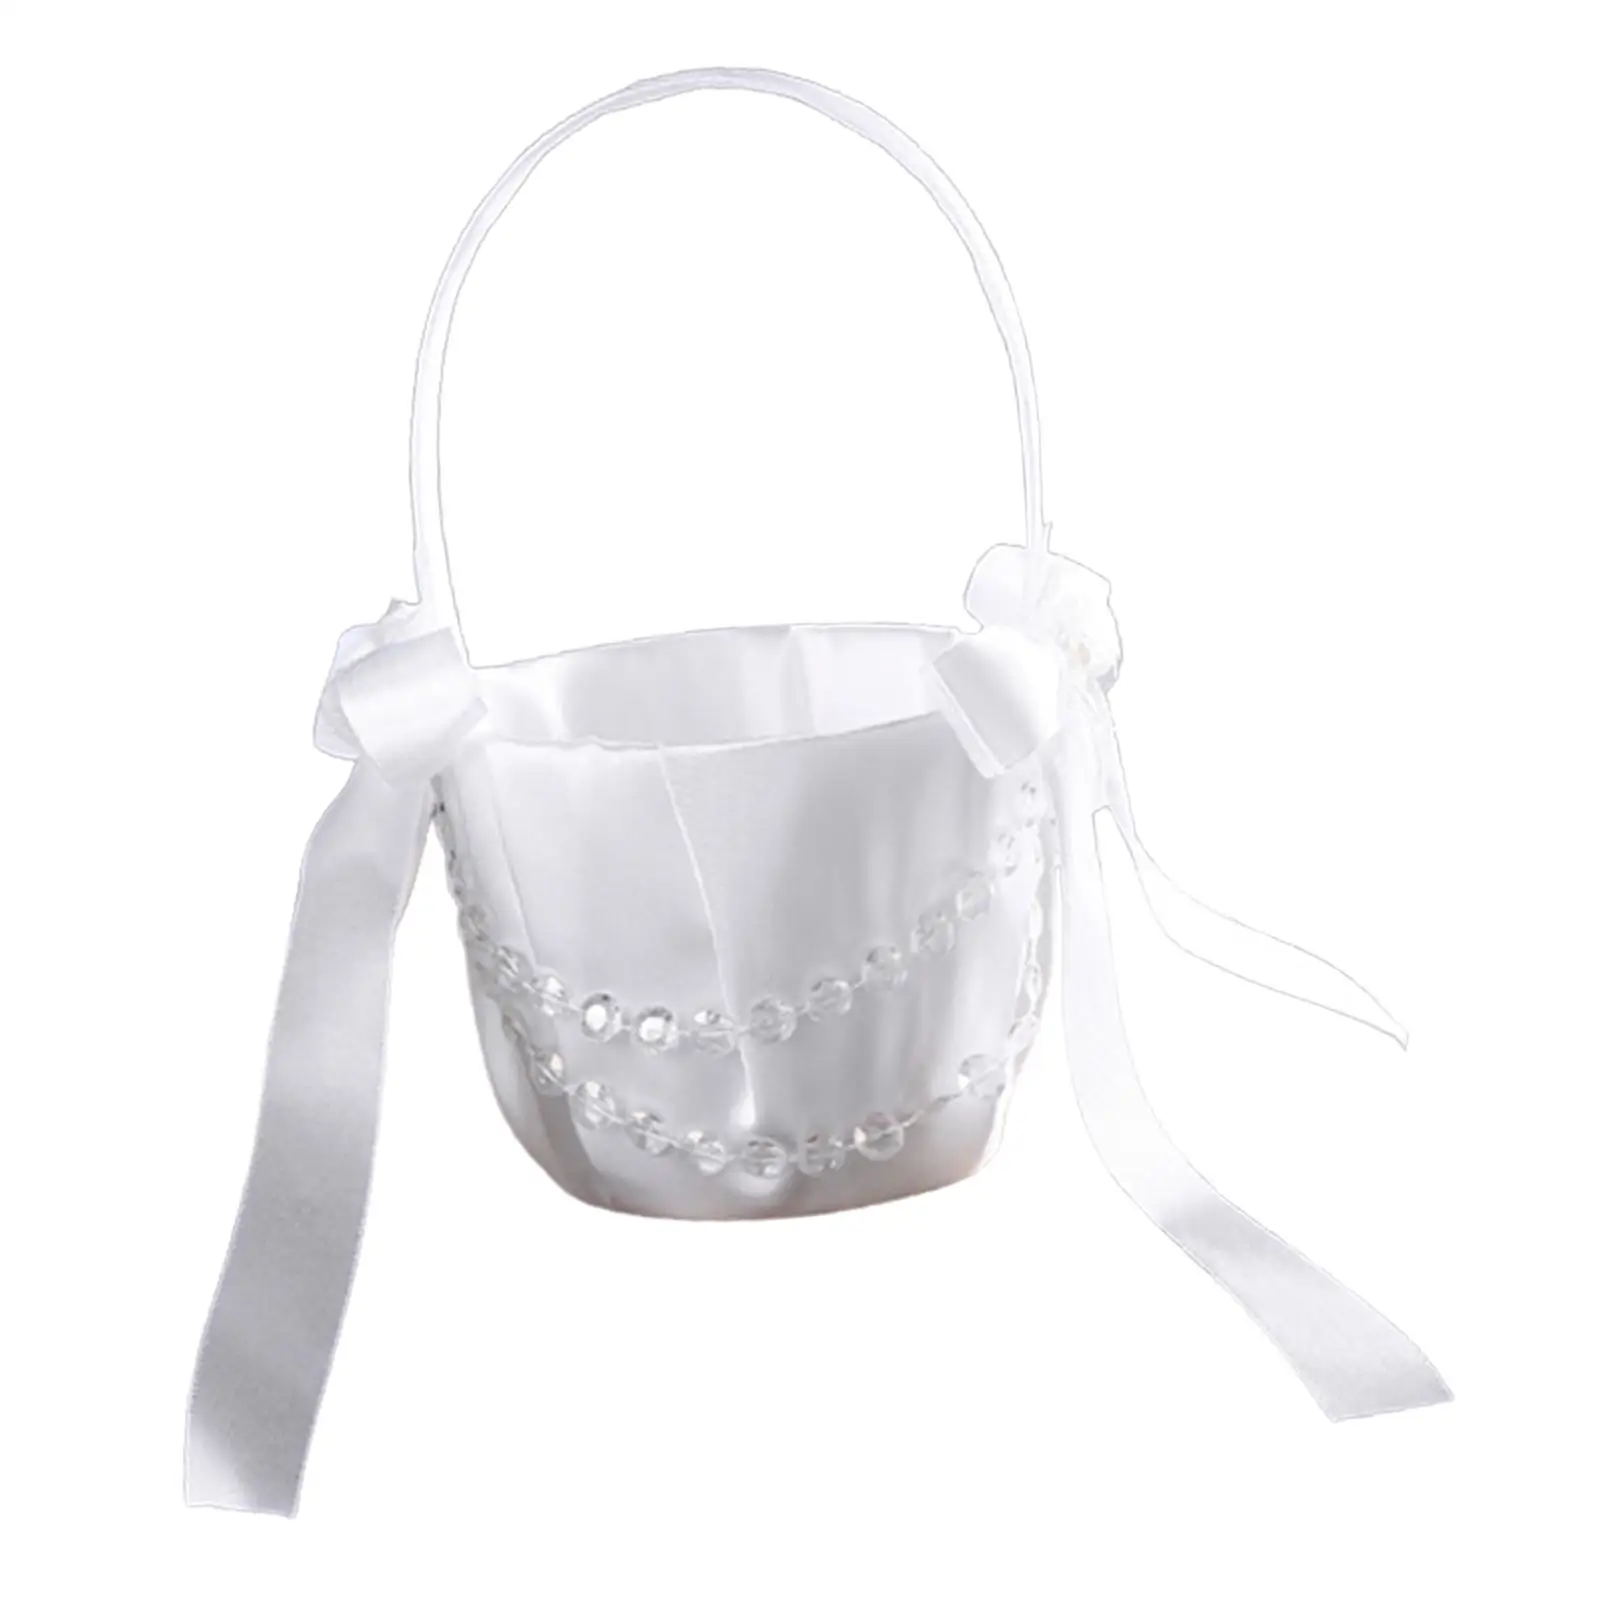 Flower Girl Basket Wedding Flower Basket Bridal Accessories Candy Container Satin Ribbons Basket for Bride Birthday Party